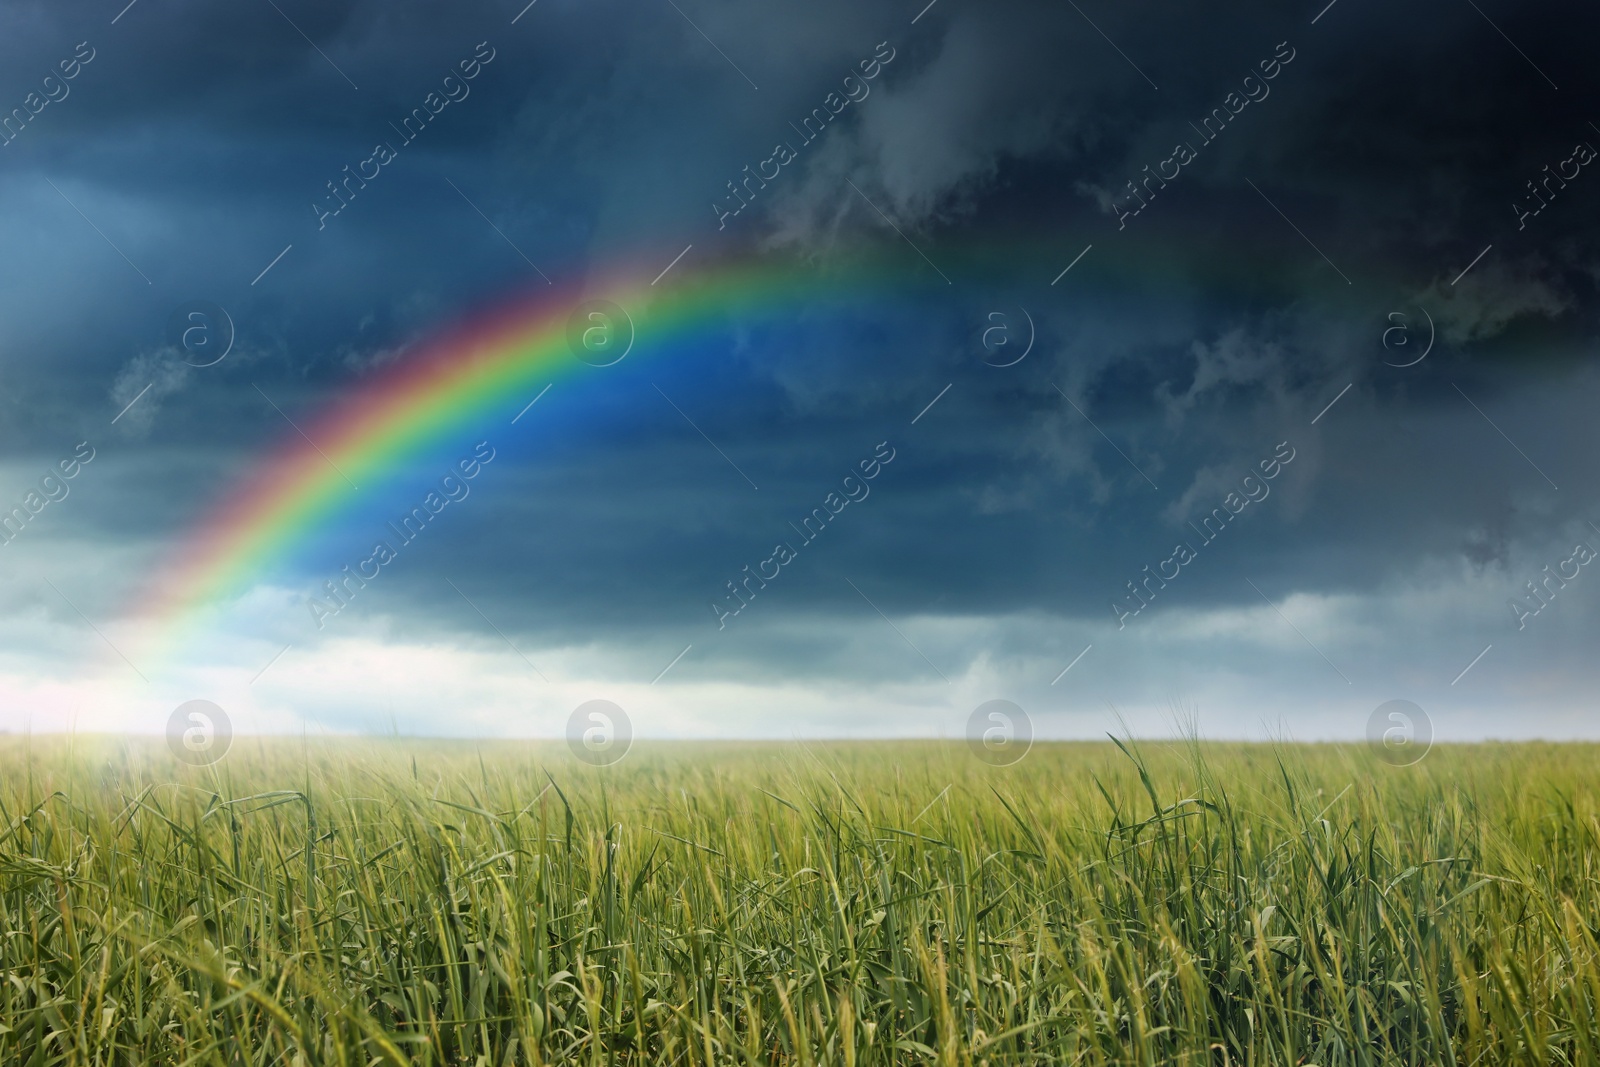 Image of Amazing rainbow over wheat field under stormy sky